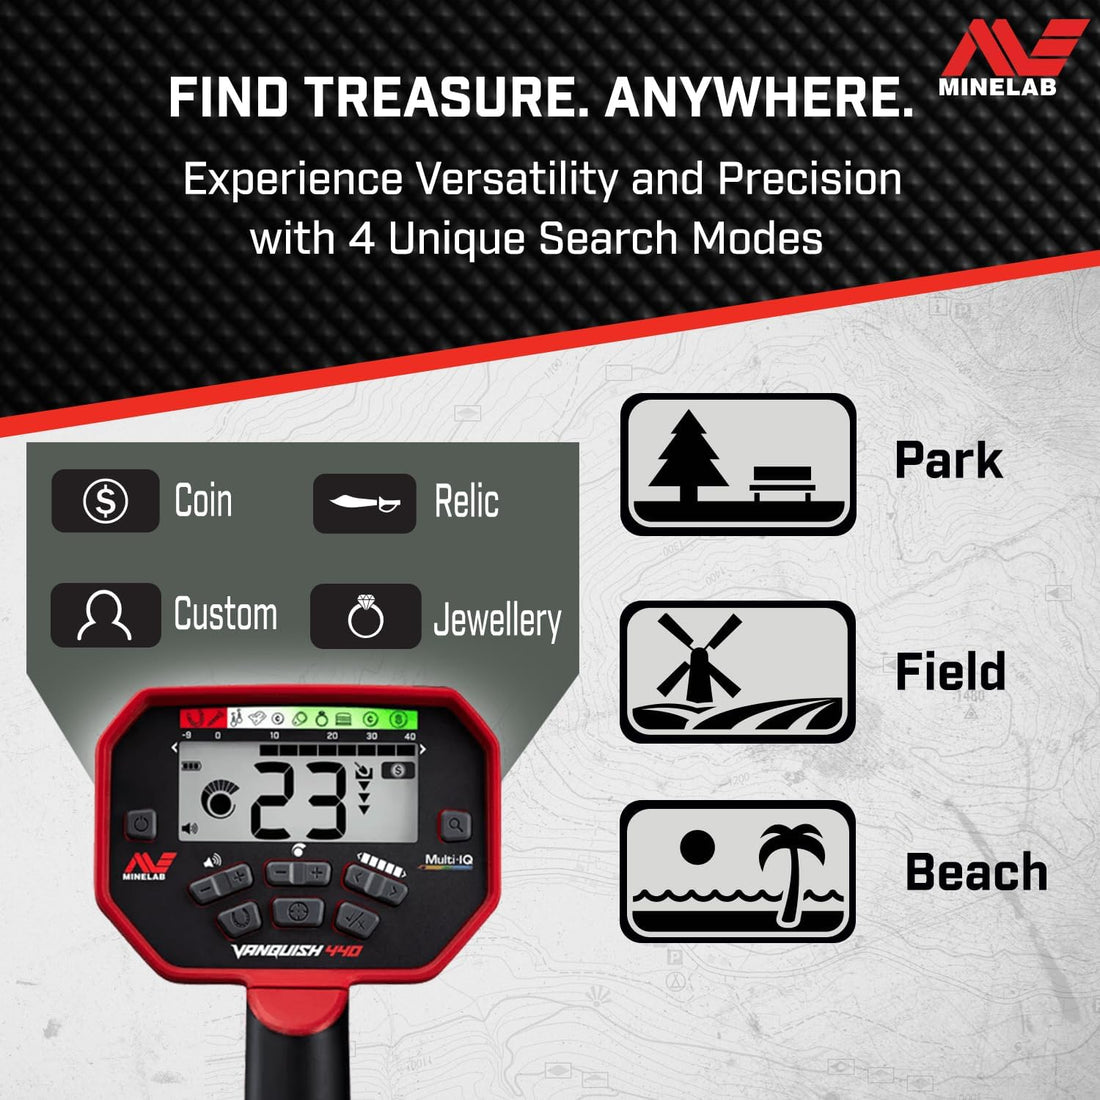 Minelab Vanquish 440 Multi-Frequency Pinpointing Metal Detector for Adults with V10 10"x7" Double-D Waterproof Coil (4 Detect Modes, Wired Headphones & Rain Cover Included)